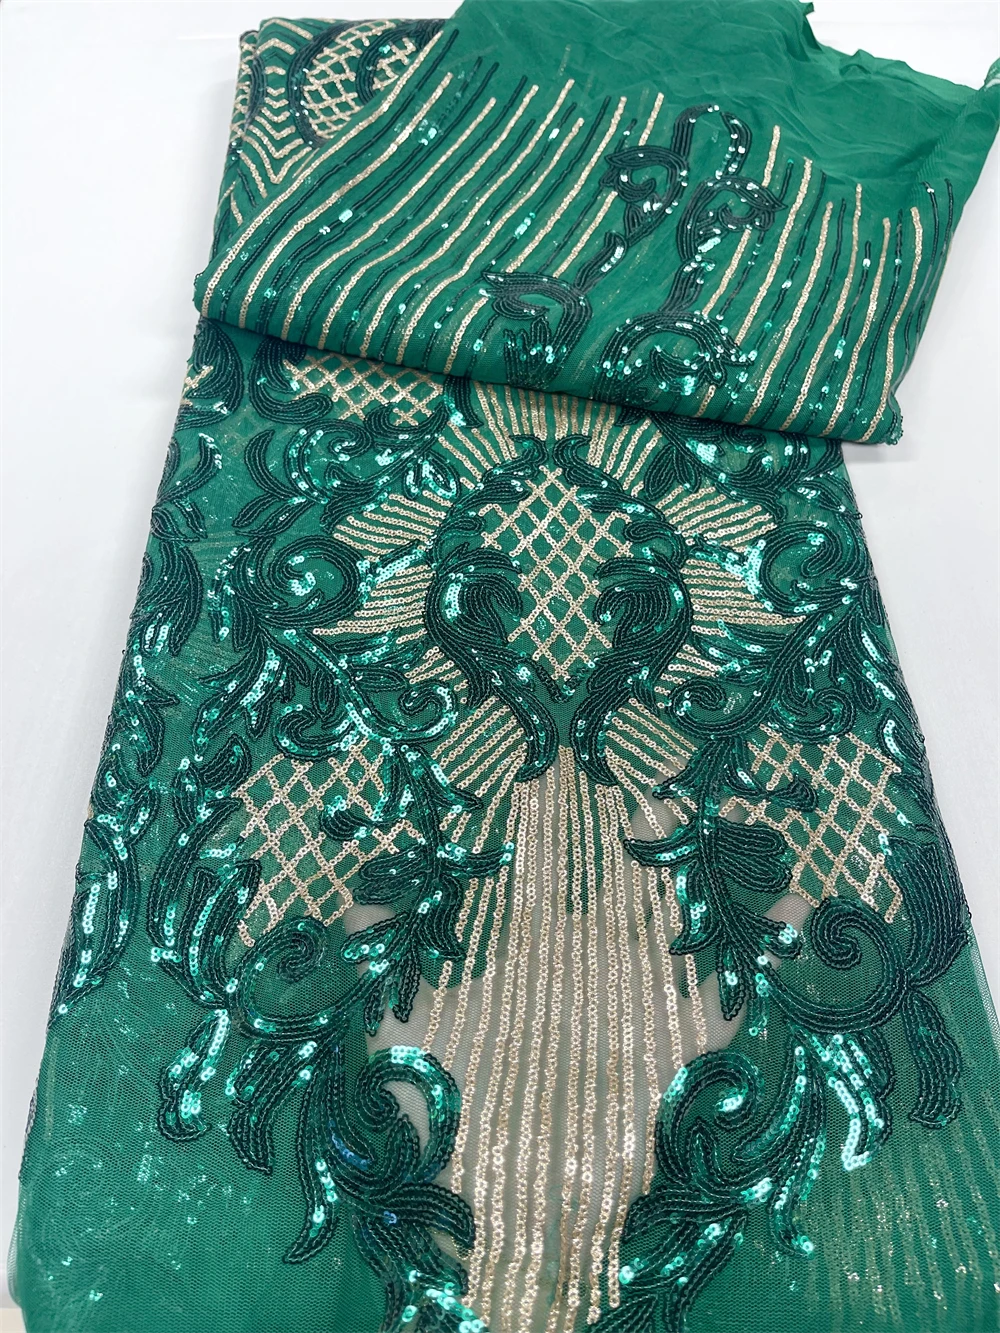 Wholesale Green African Sequins Lace Fabric 2022 French Tulle Net Lace,High Quality Net Embroidery Nigerian Wedding Party 5Yards